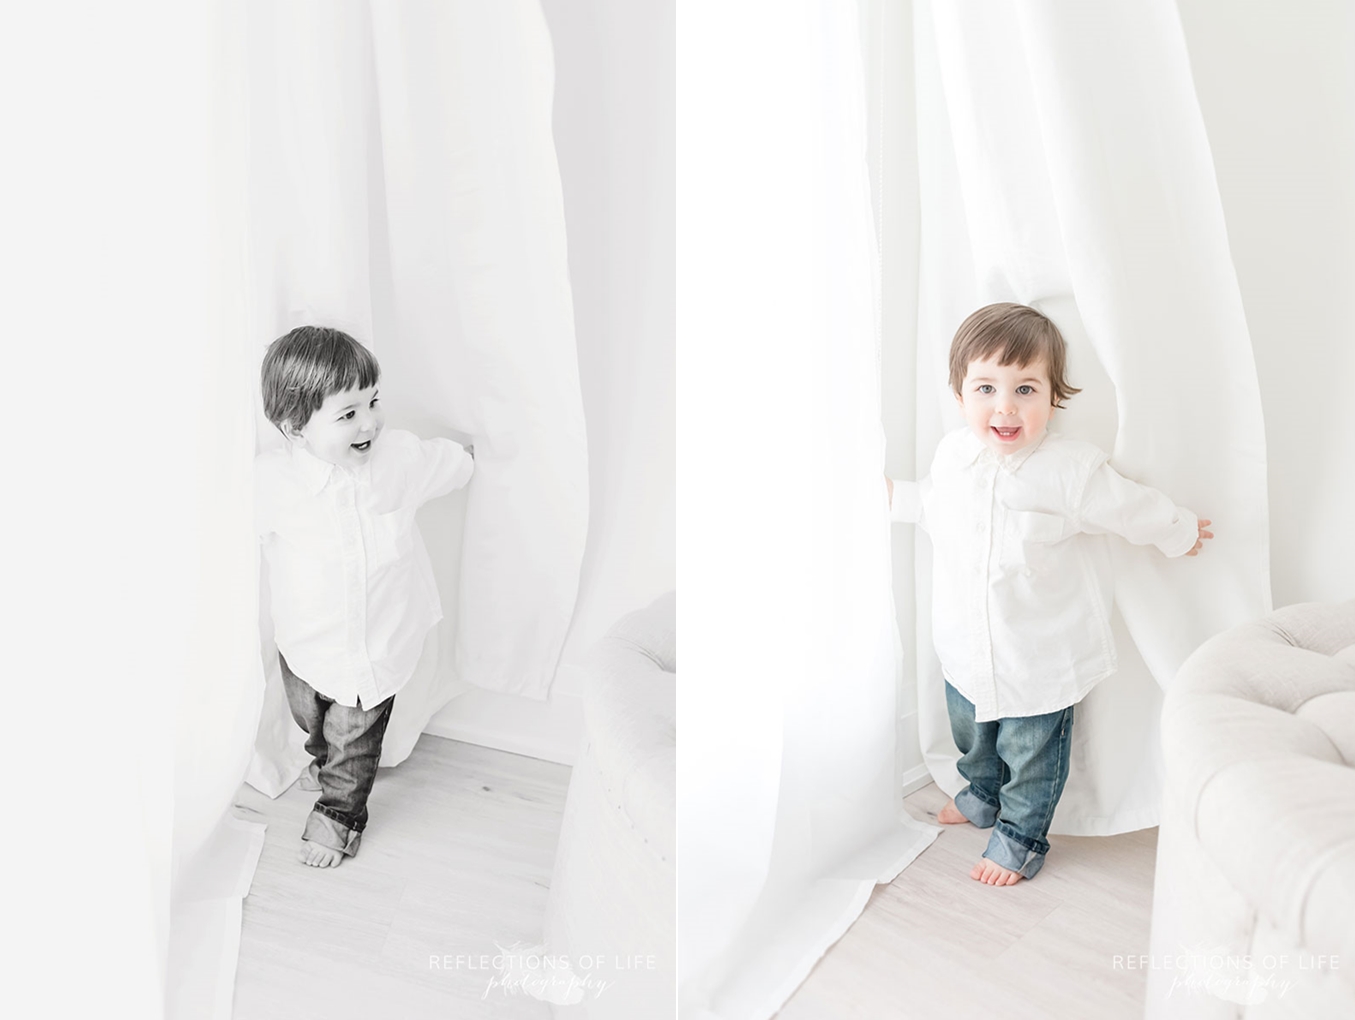 Little boy playing in curtains